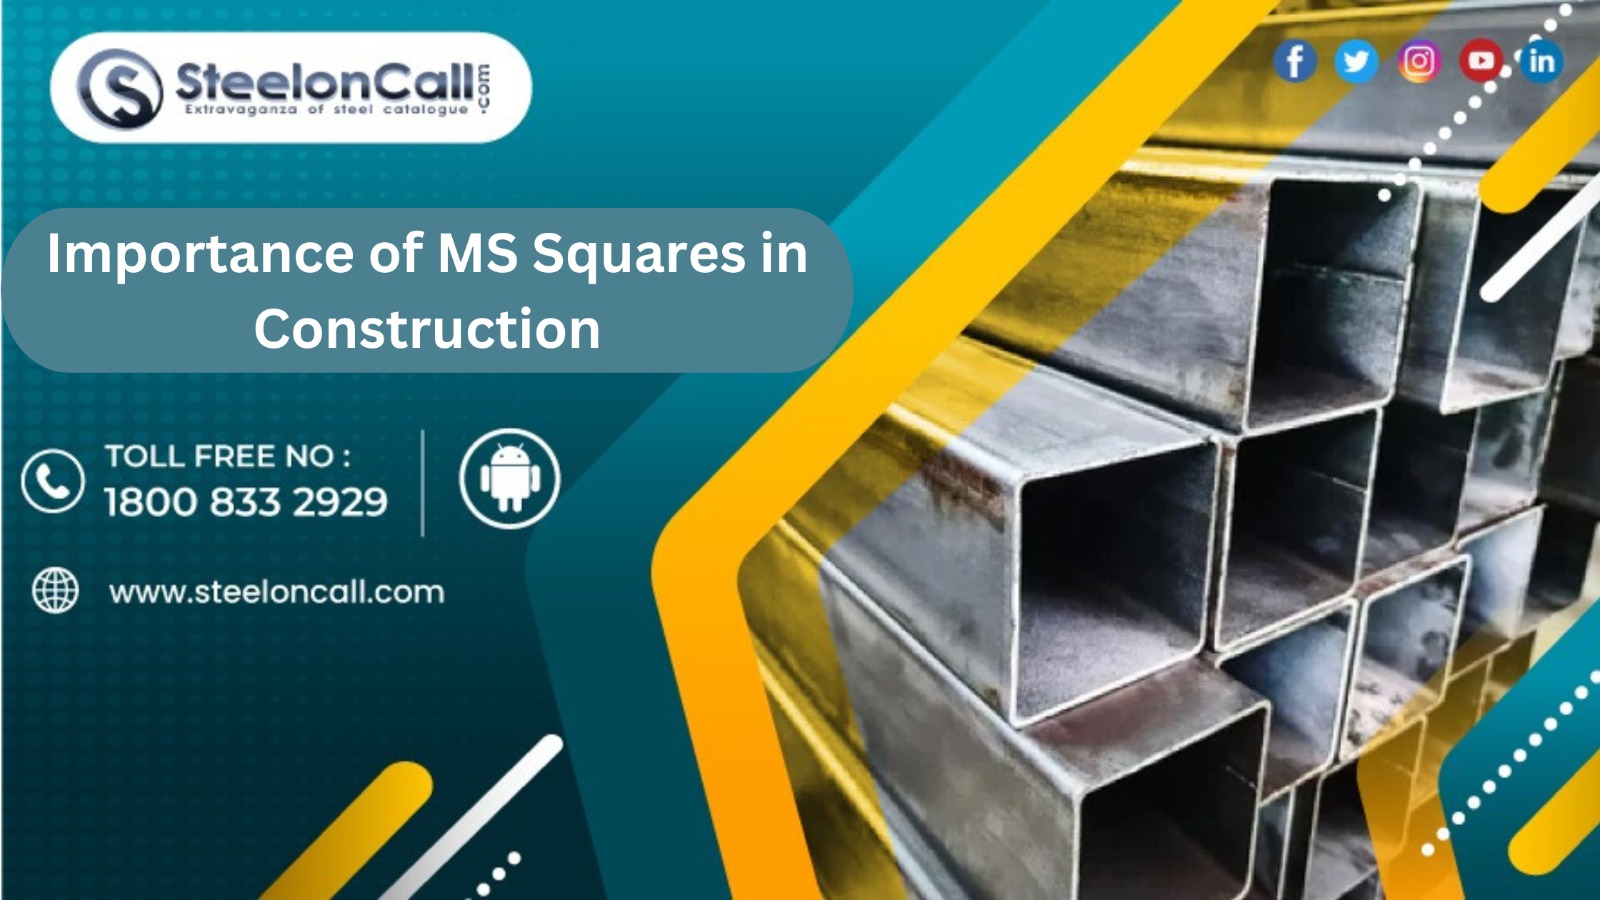 The Importance of MS Squares in Construction